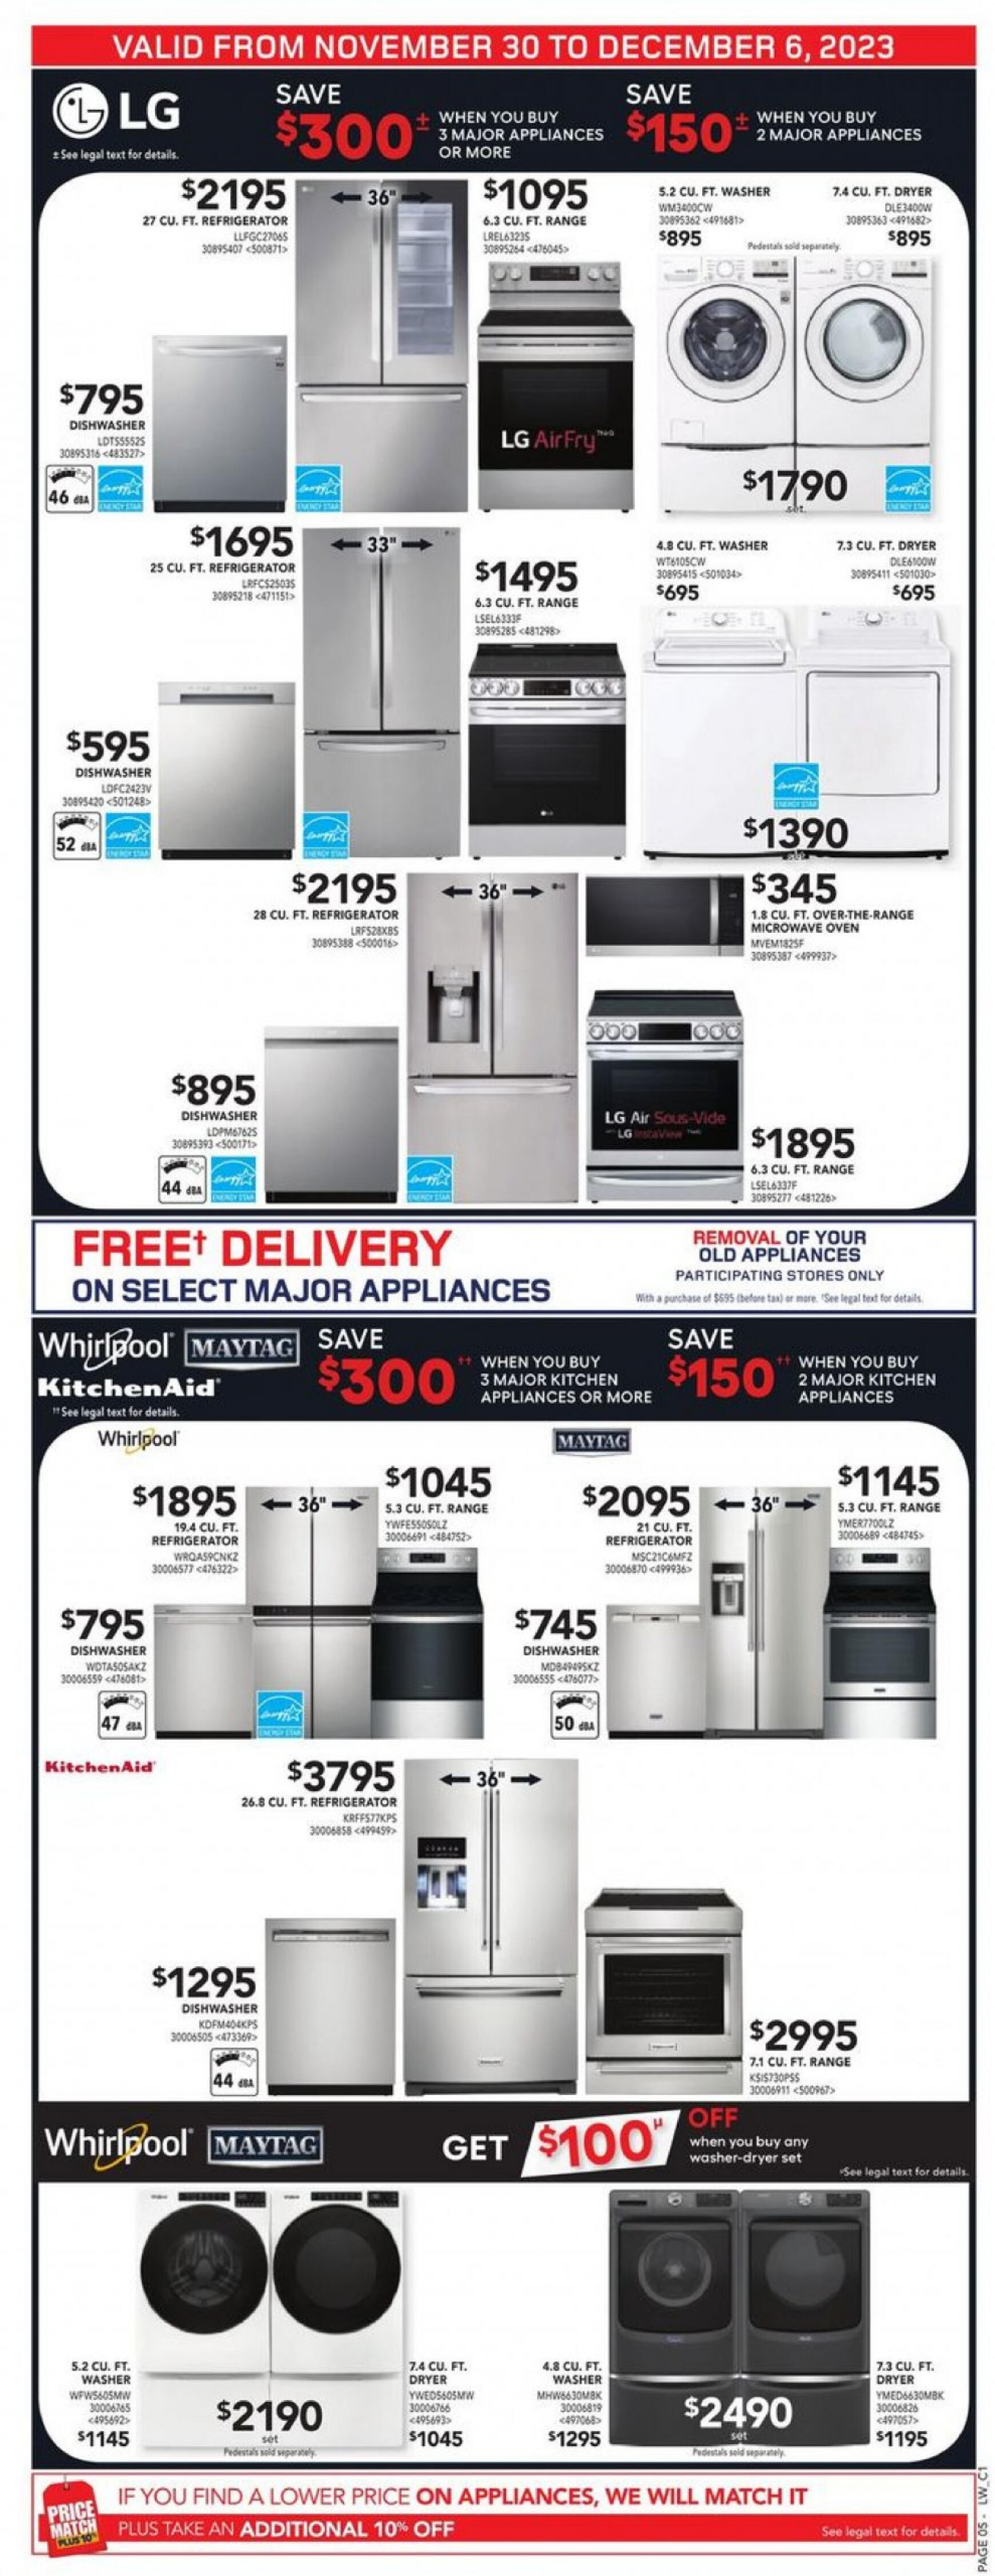 lowes - Lowe's valid from 30.11.2023 - page: 8